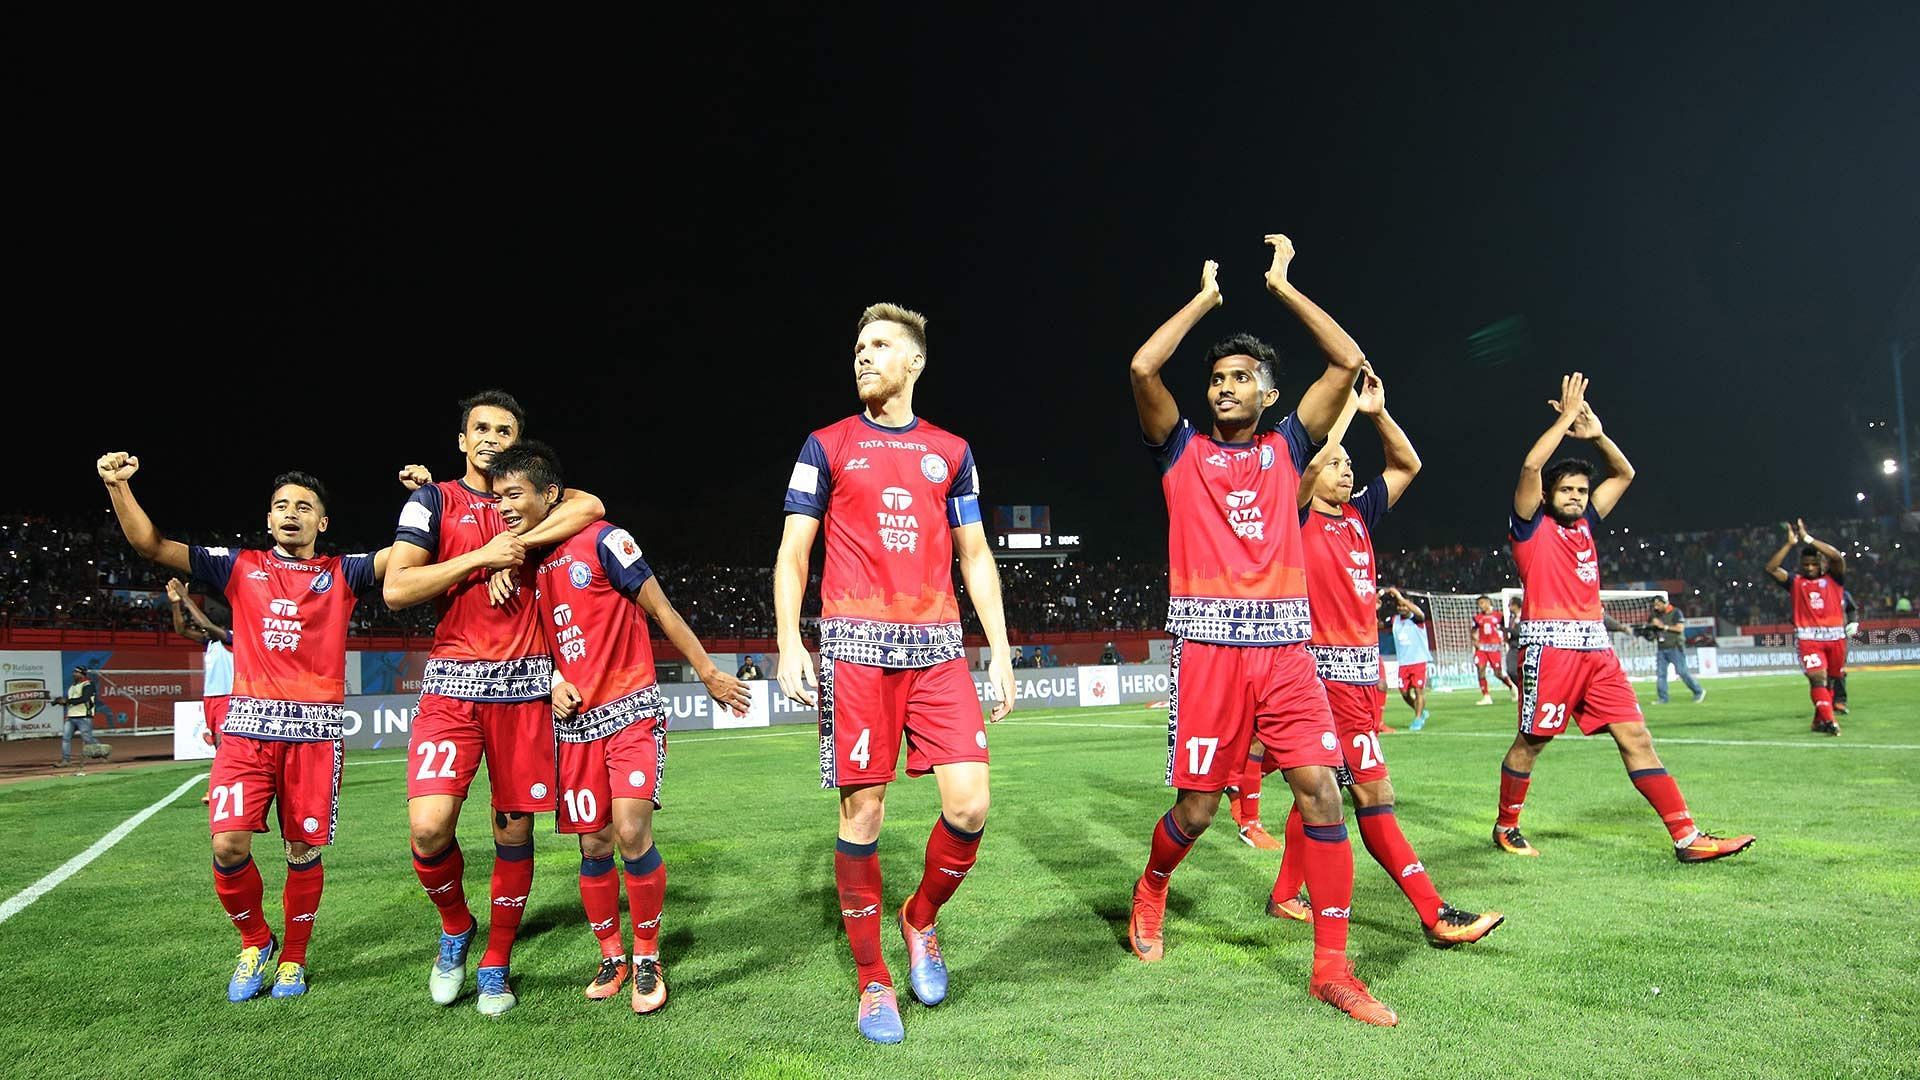 ISL Live Streaming: When and where to watch Odisha FC vs Jamshedpur FC?